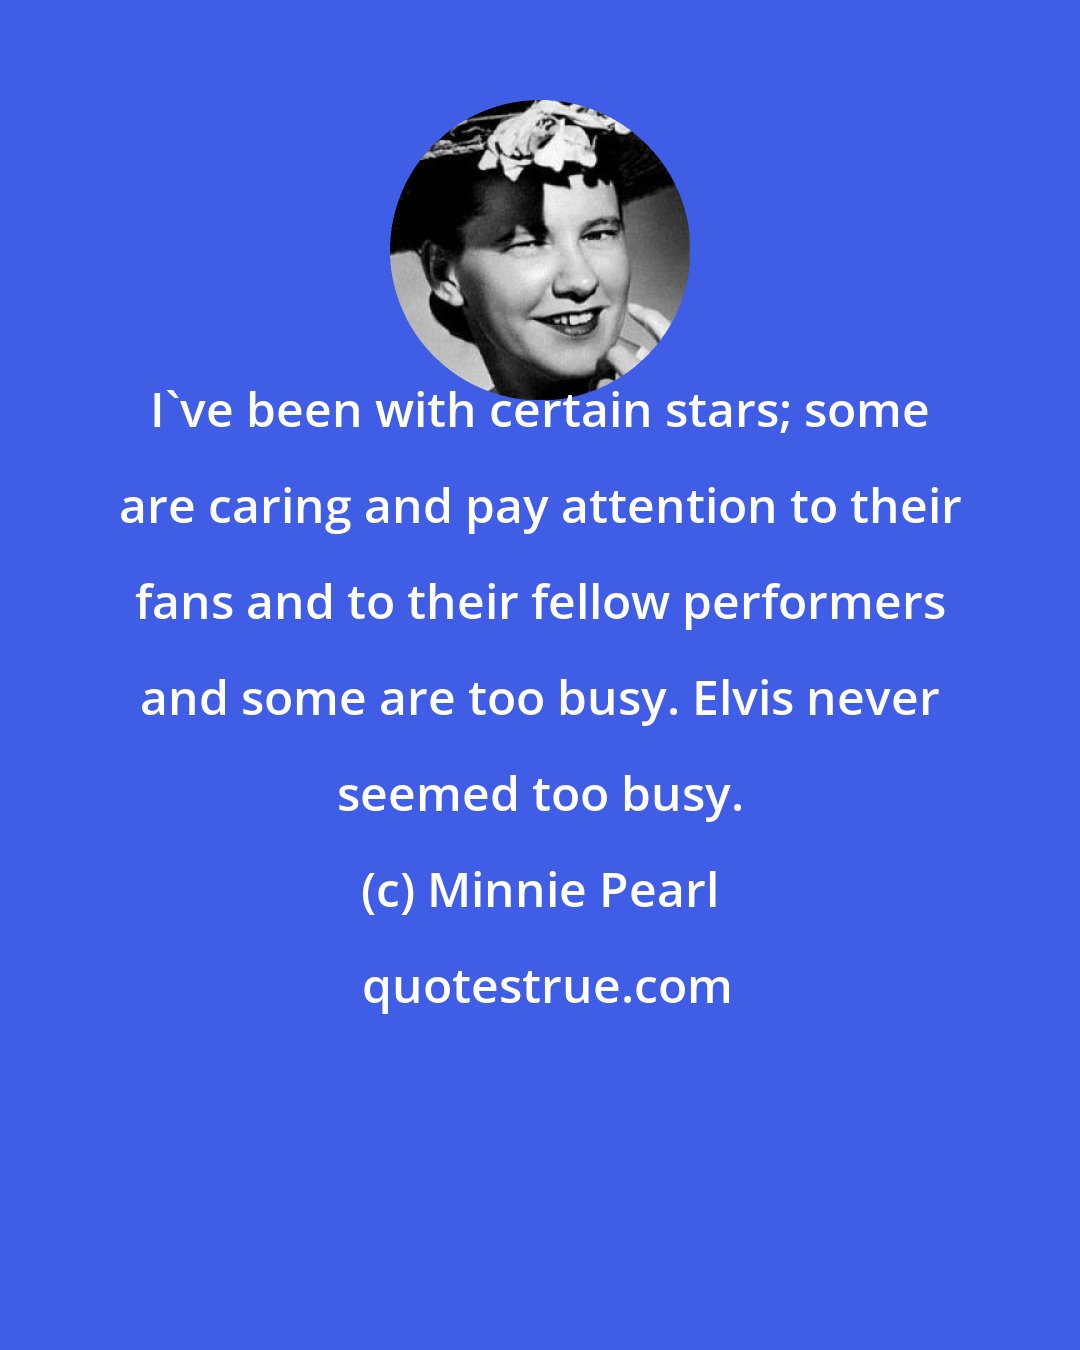 Minnie Pearl: I've been with certain stars; some are caring and pay attention to their fans and to their fellow performers and some are too busy. Elvis never seemed too busy.